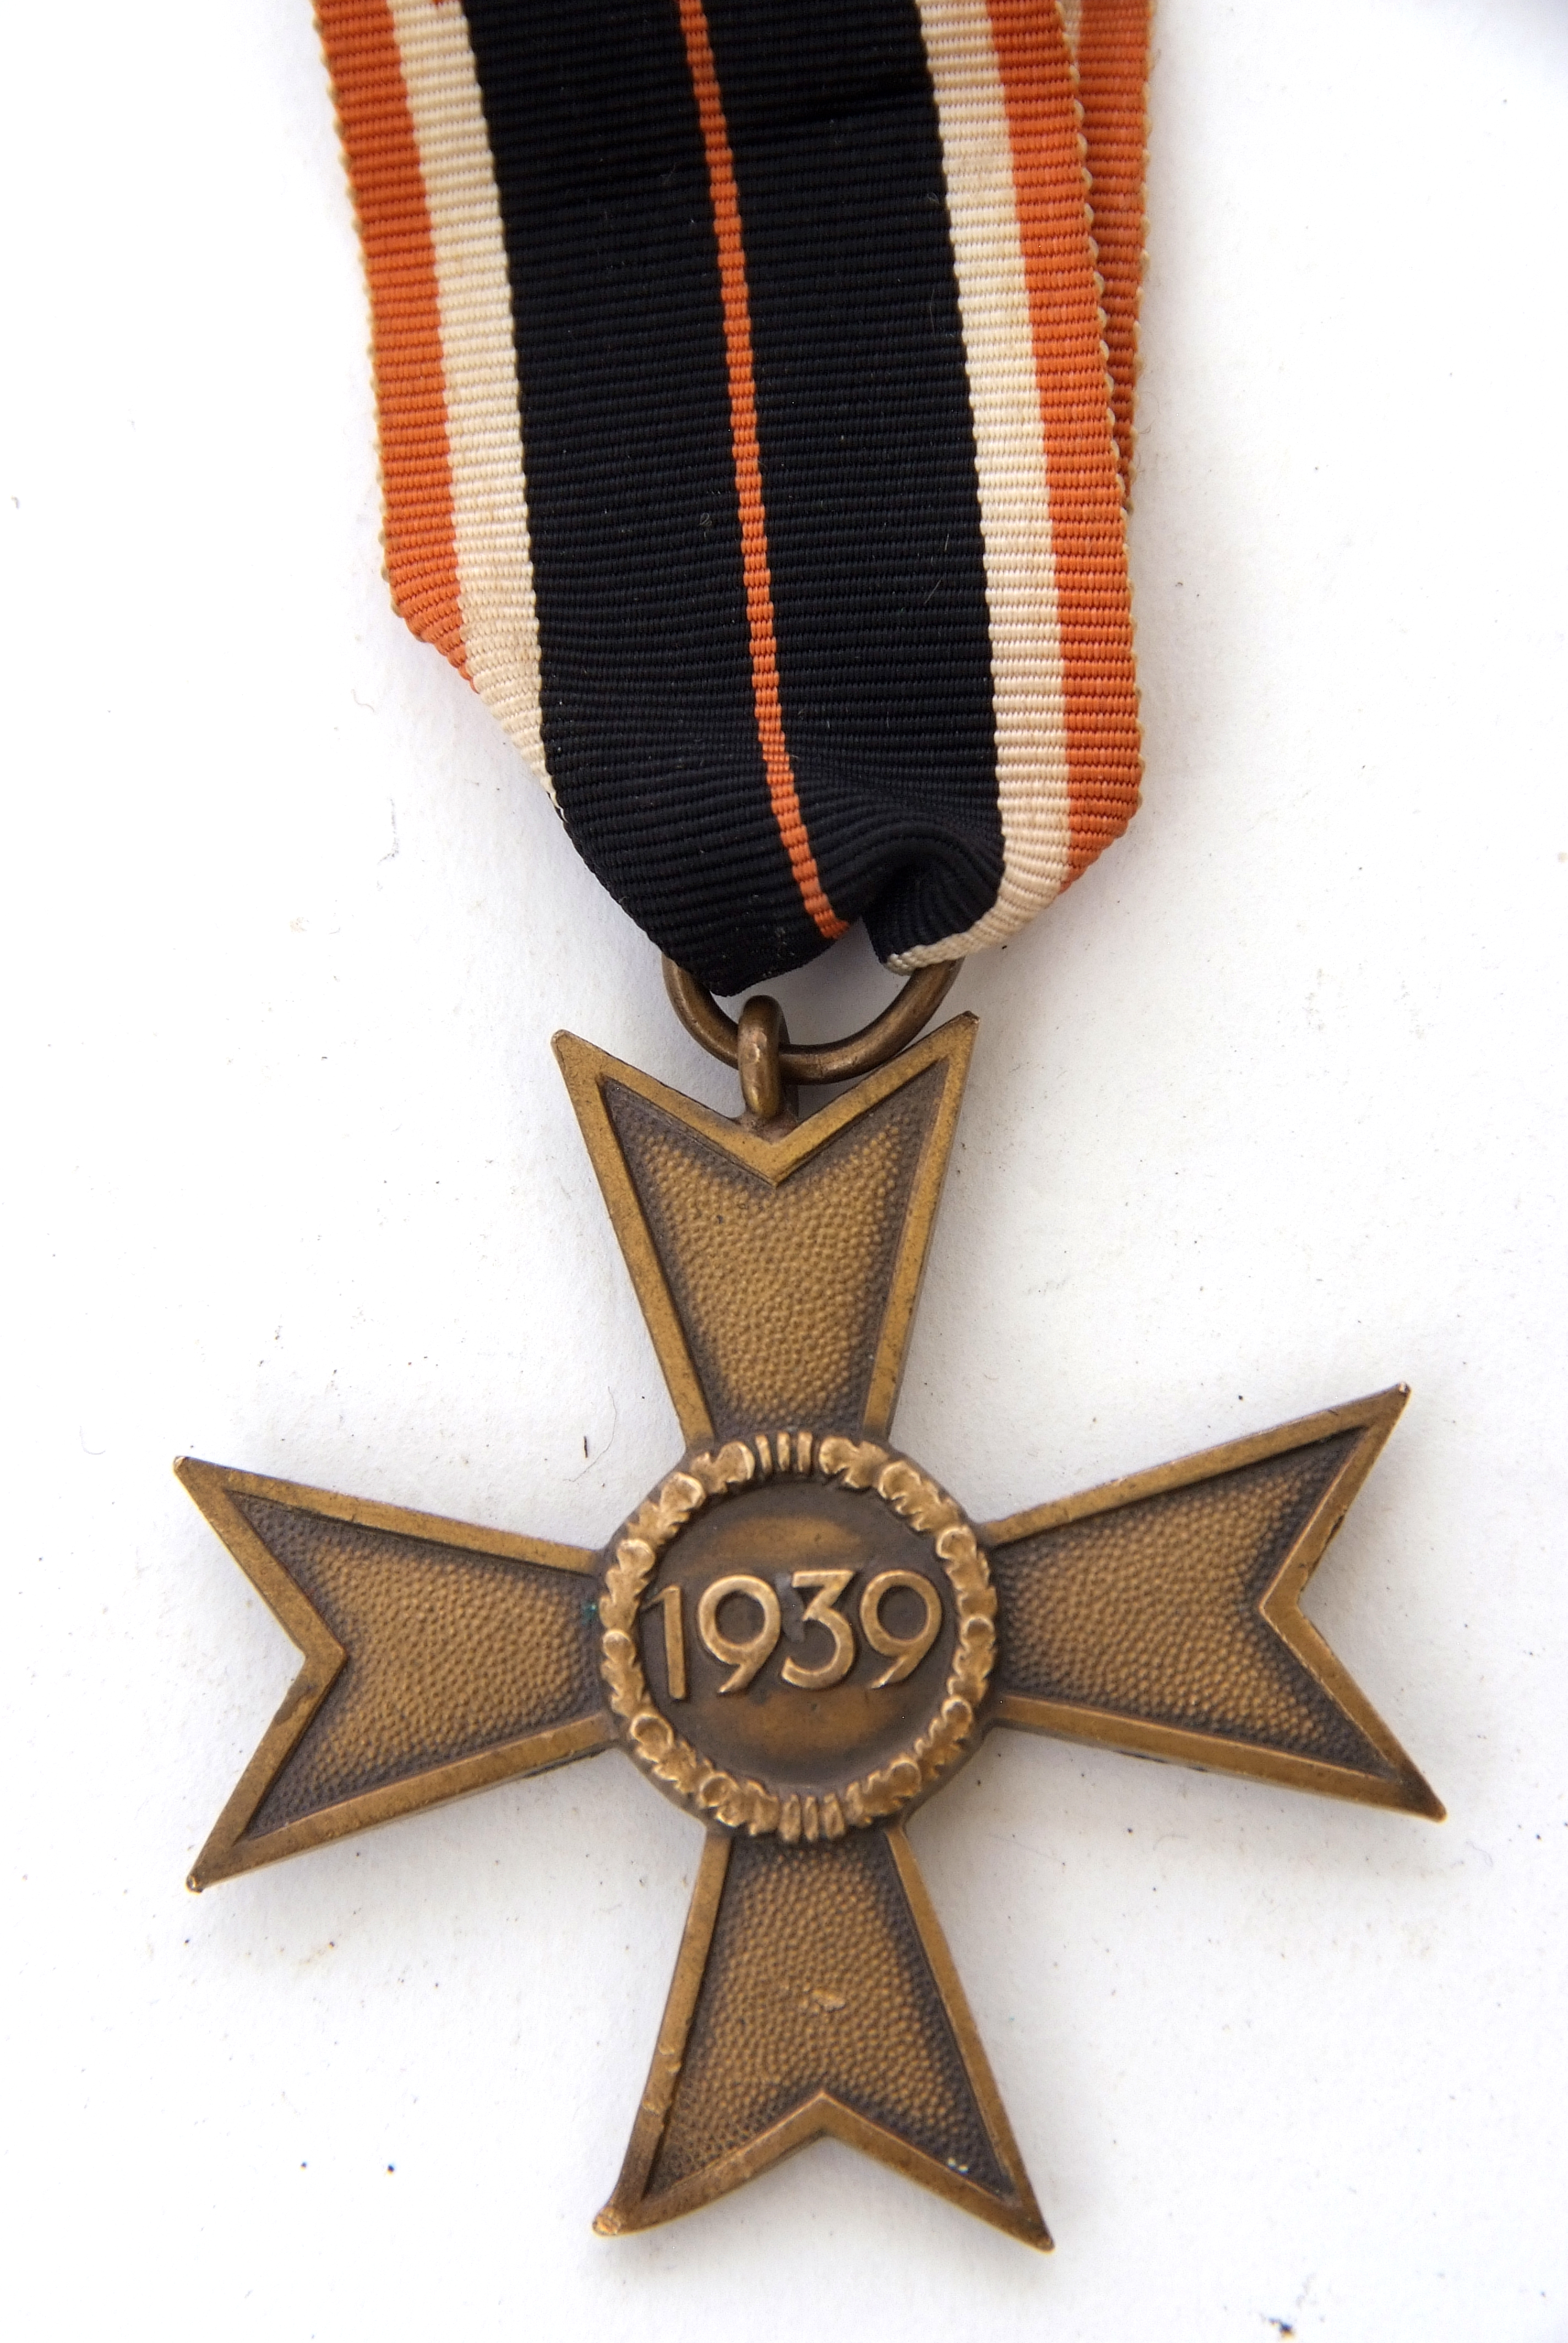 Third Reich German merit cross with civilian ribbon on suspension loop, (ribbon faded) - Image 2 of 2